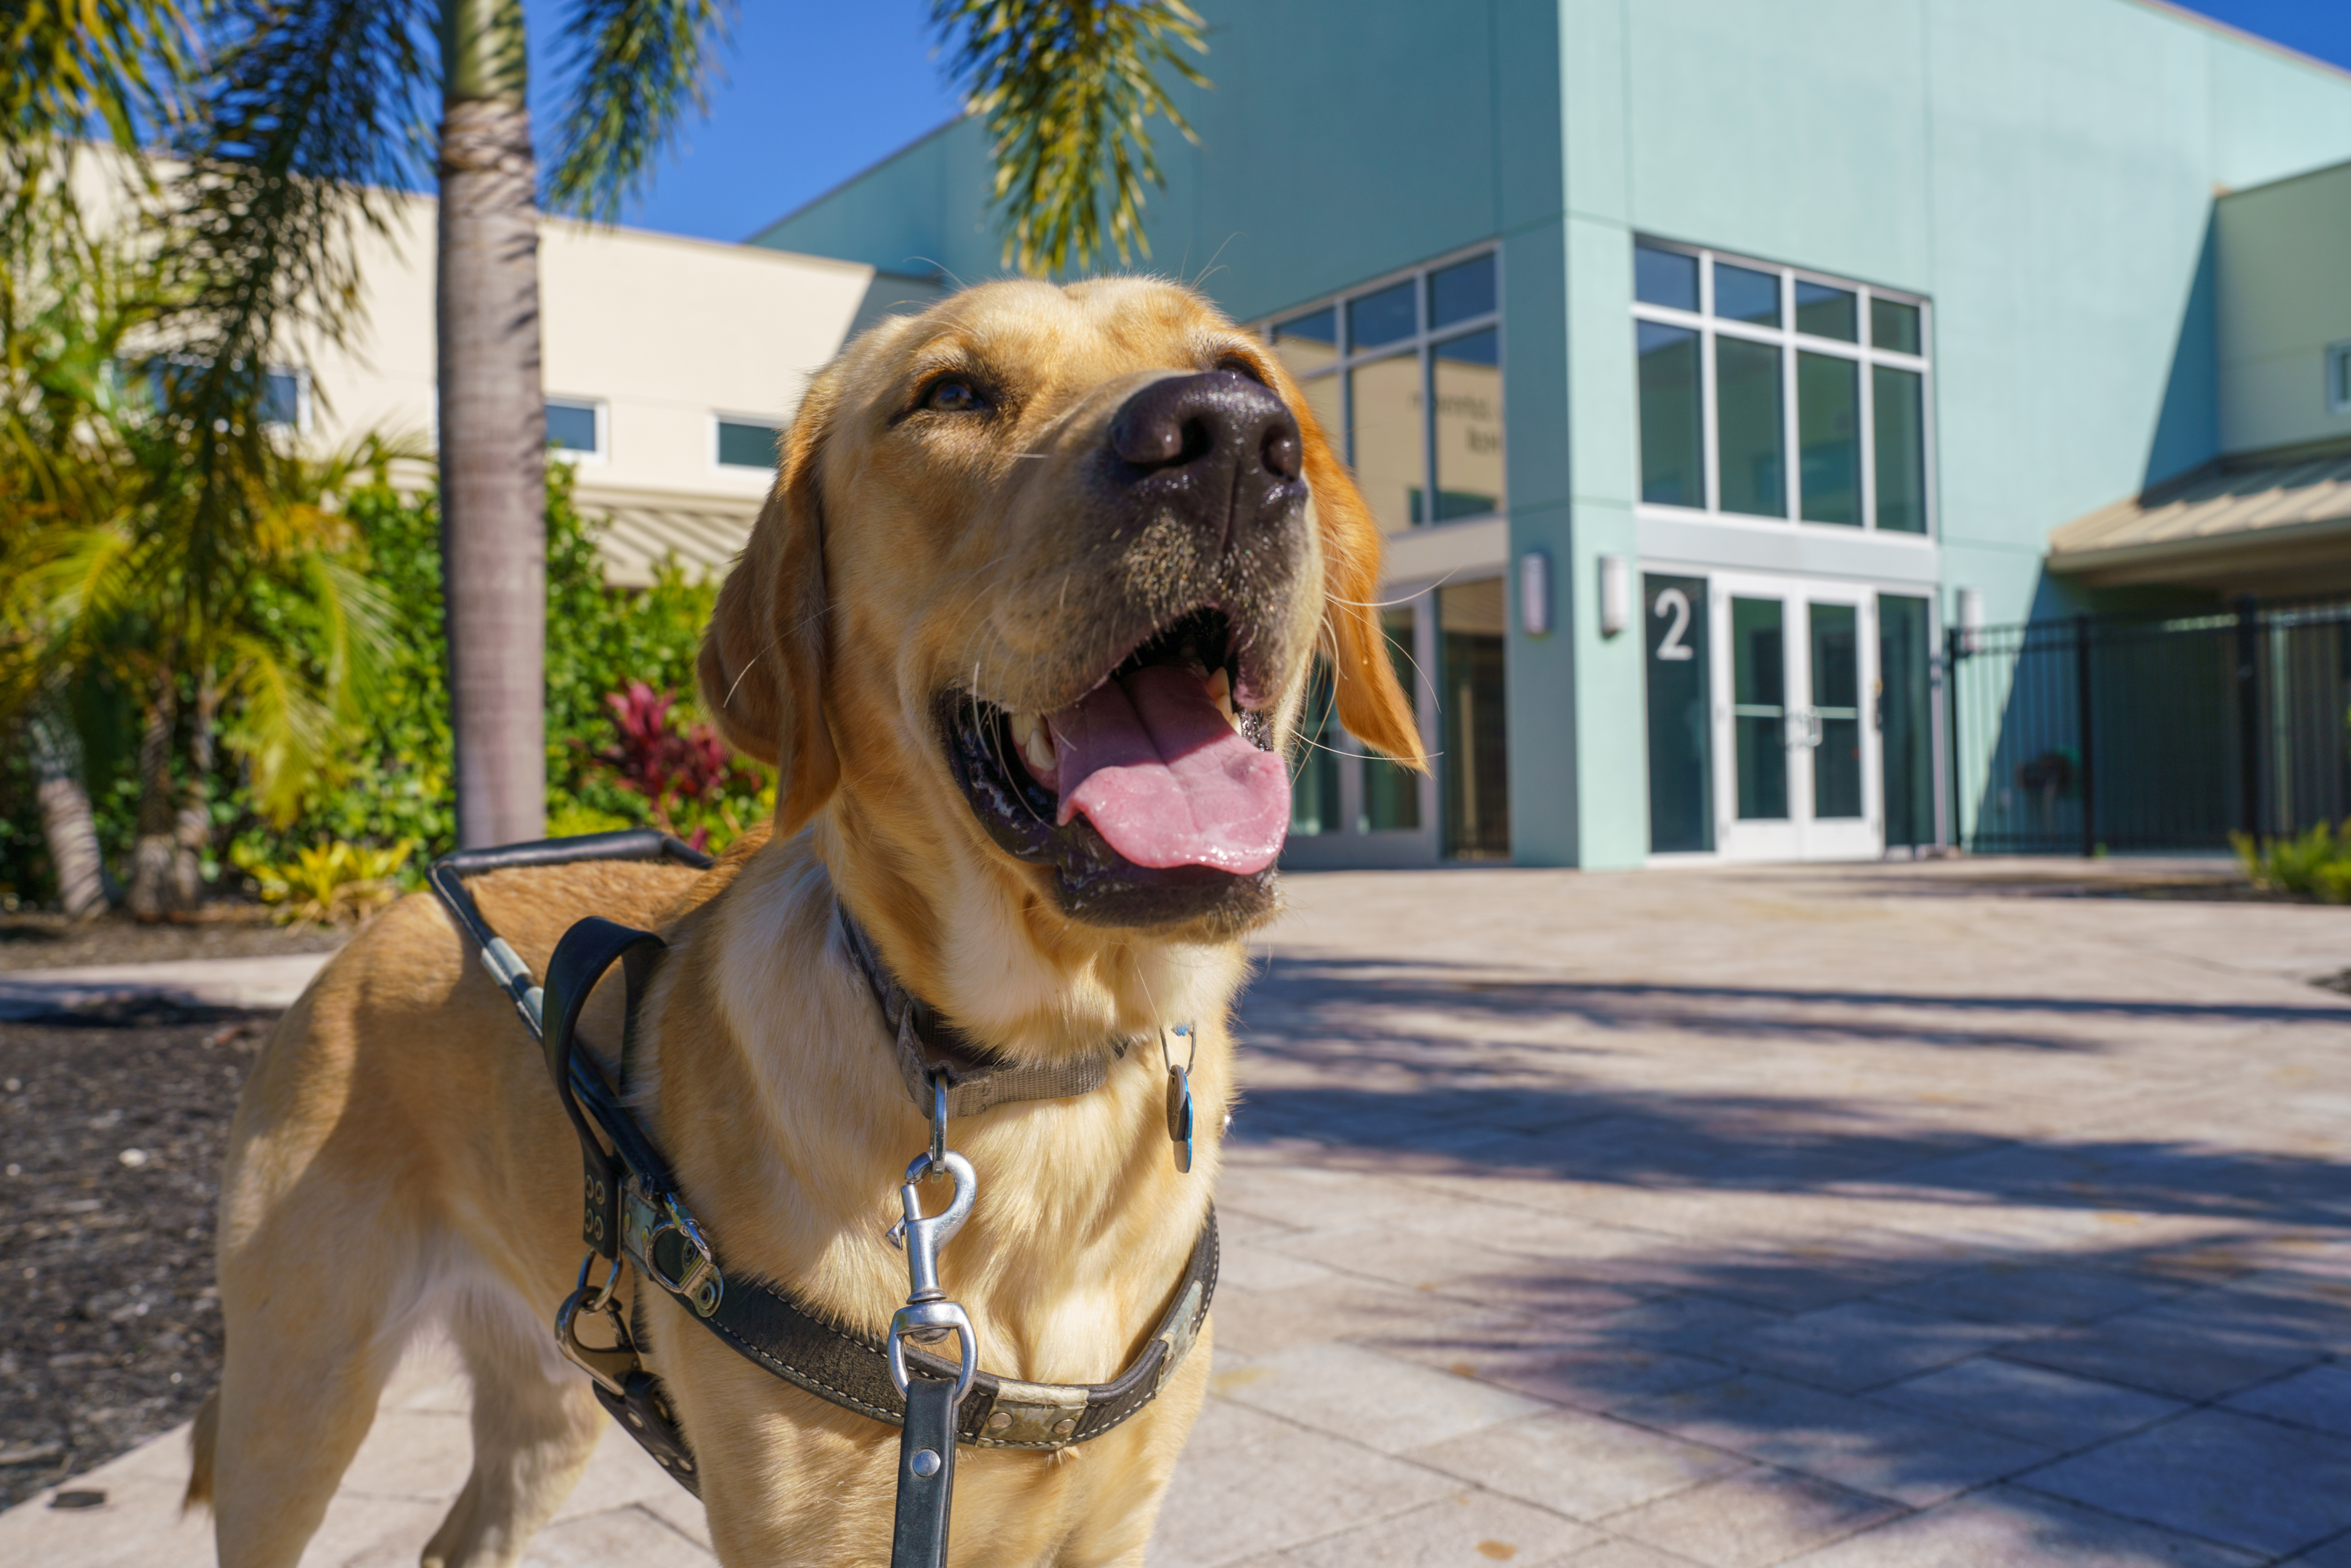 A yellow Labrador standing outside a Dogs Inc building.